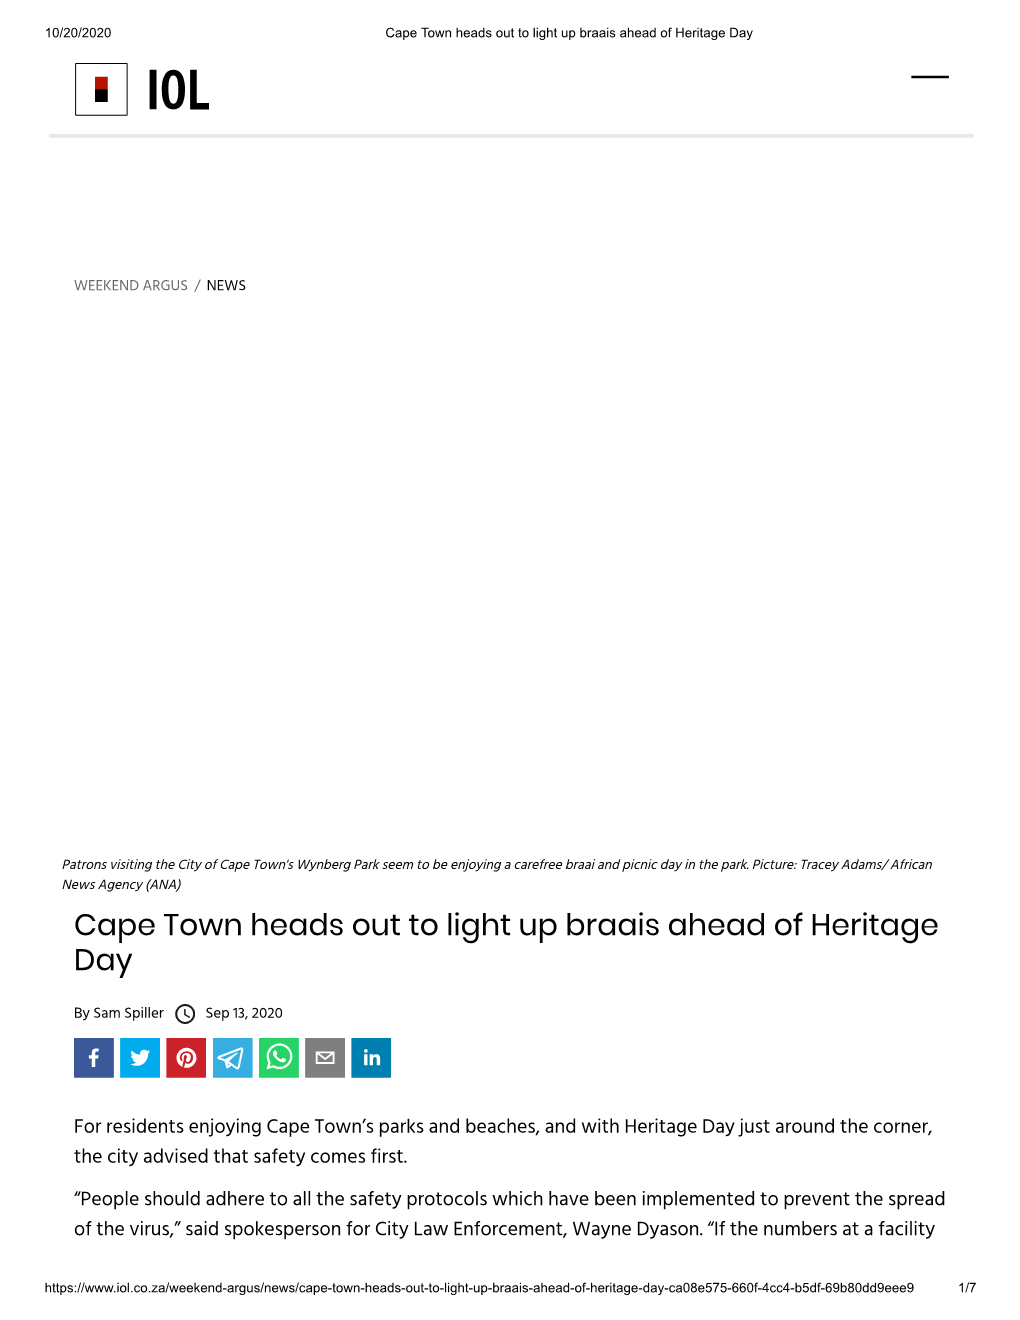 Cape Town Heads out to Light up Braais Ahead of Heritage Day.Pdf